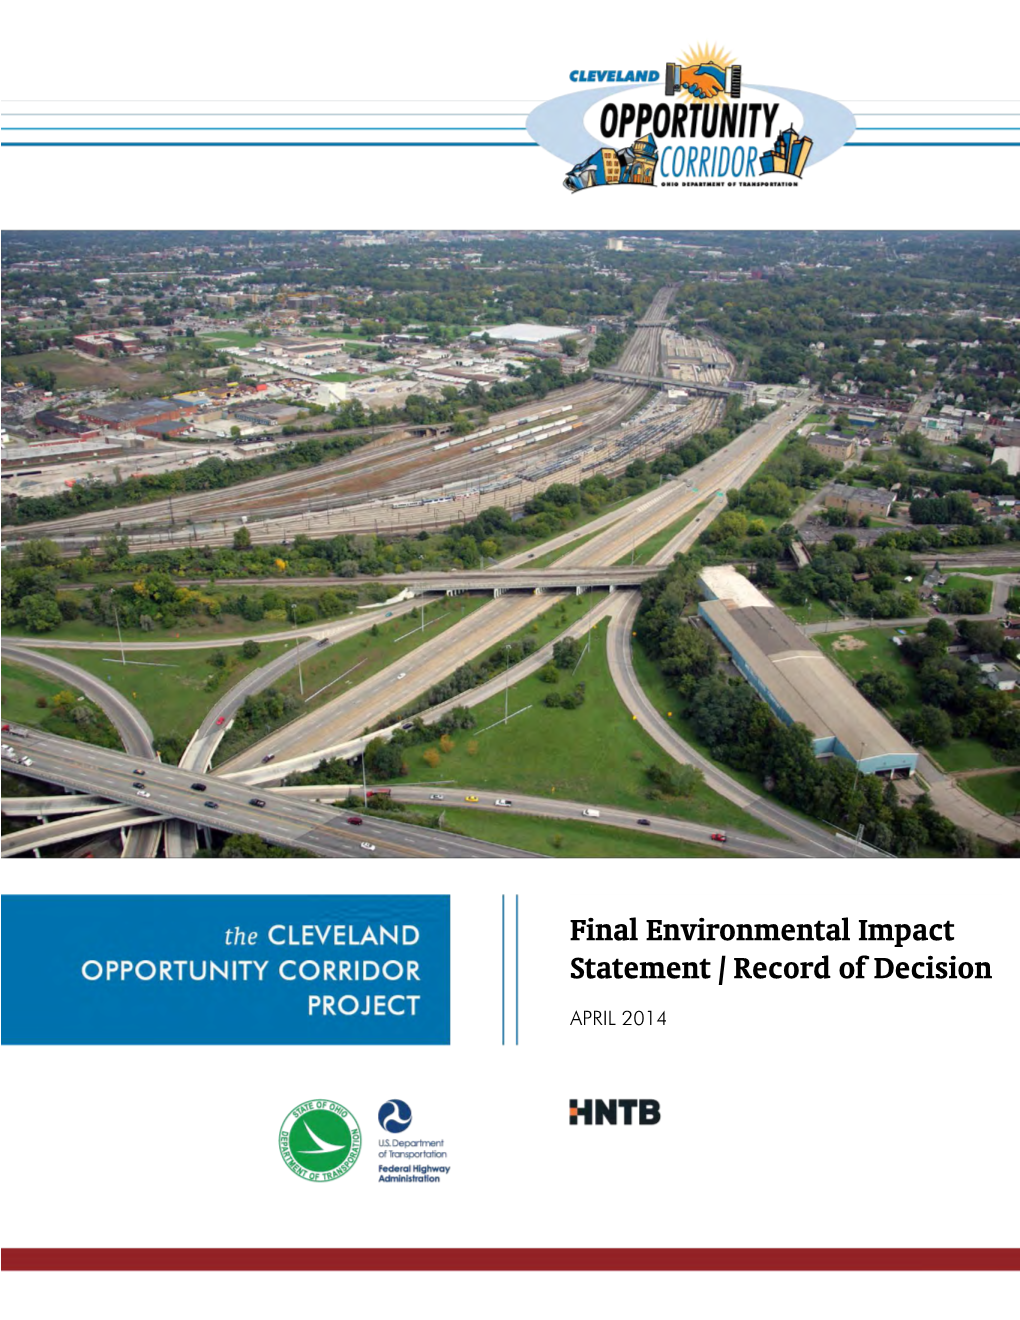 The Cleveland Opportunity Corridor Project Final Environmental Impact Statement/Record of Decision